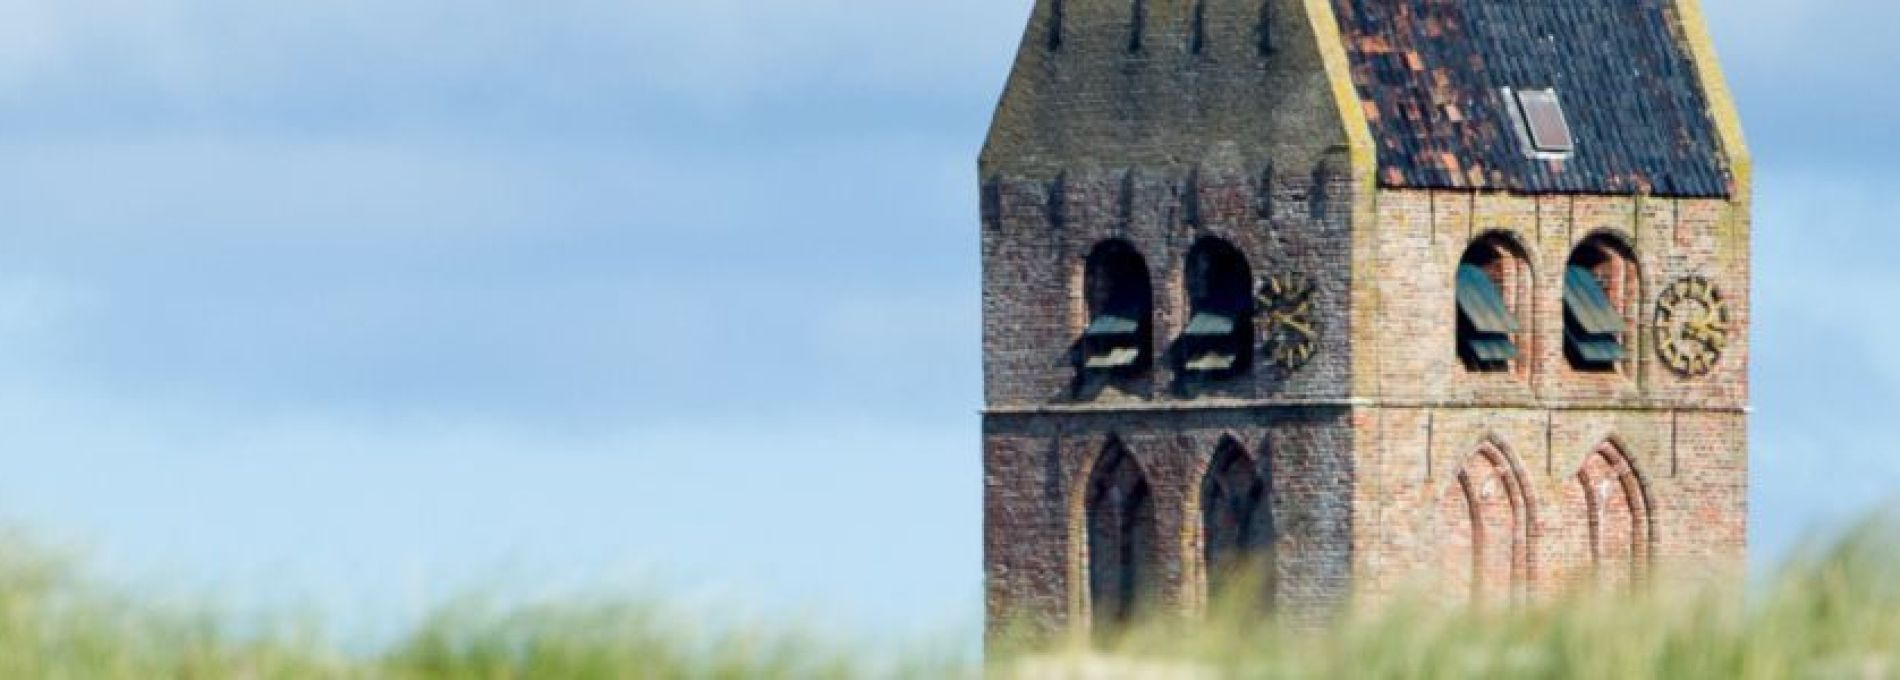 Frequently asked questions about public services - Tourist Information Centre VVV Ameland.